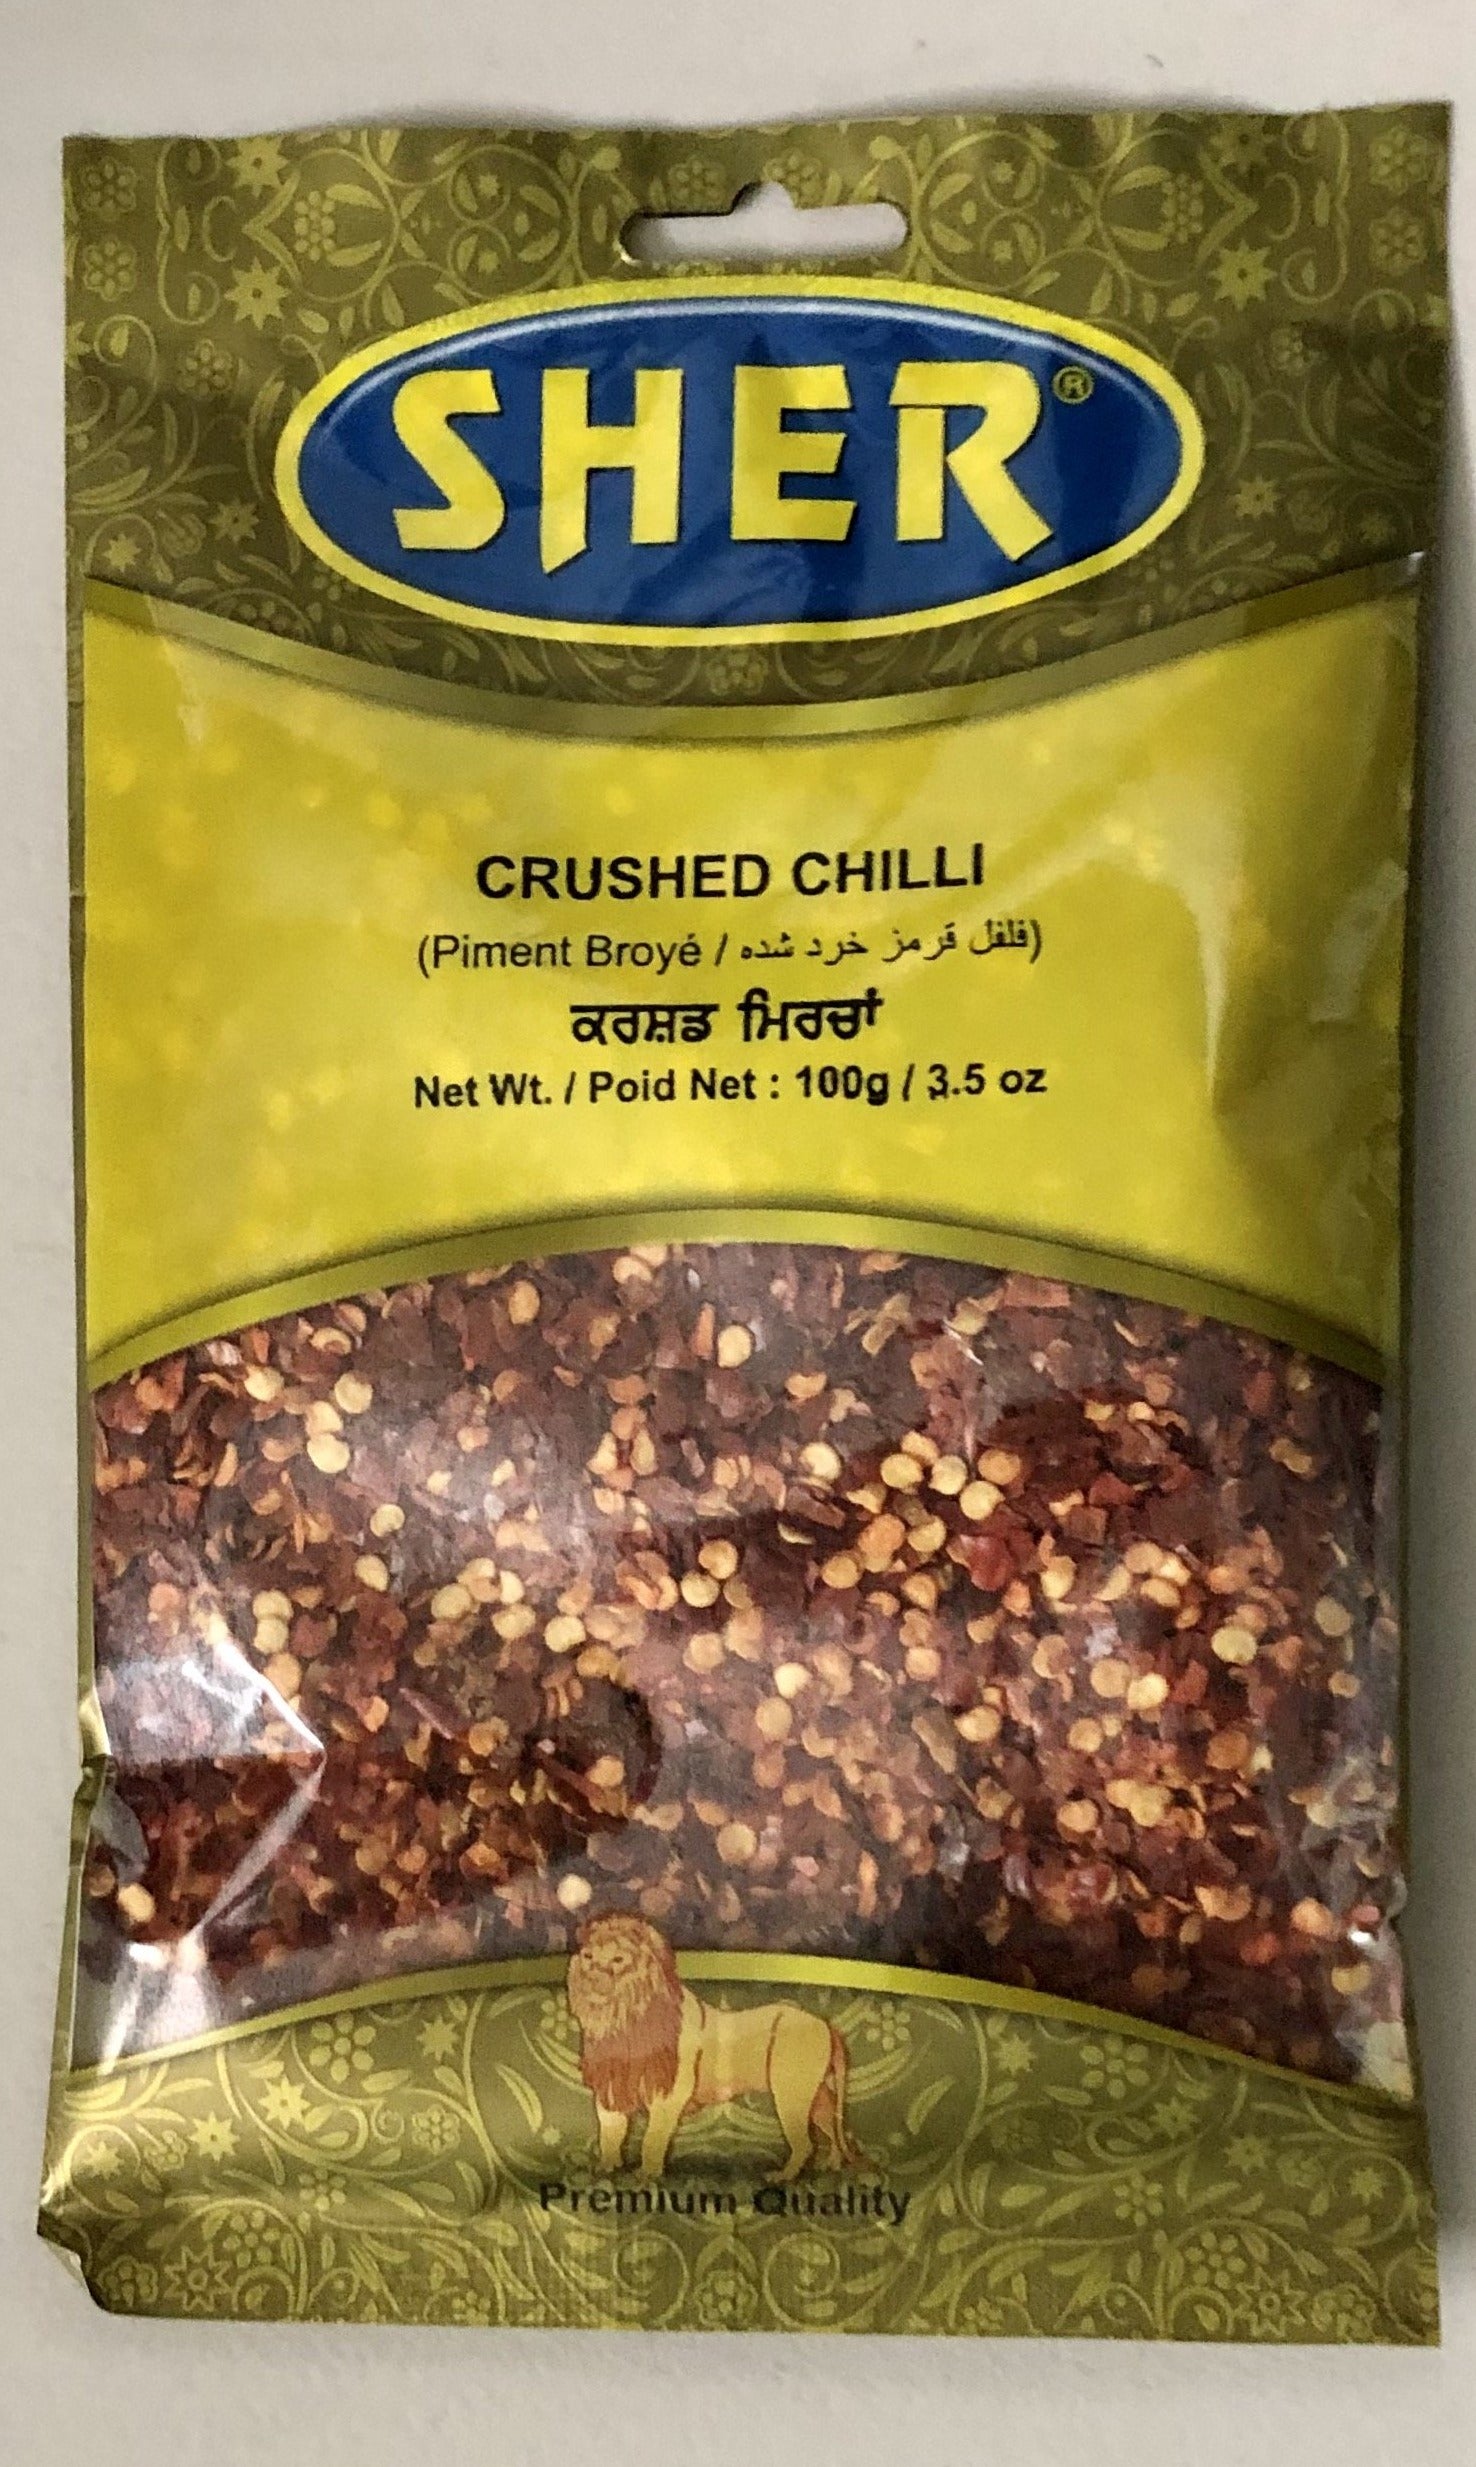 Crushed Chilli Peppers - Sher - 100gm